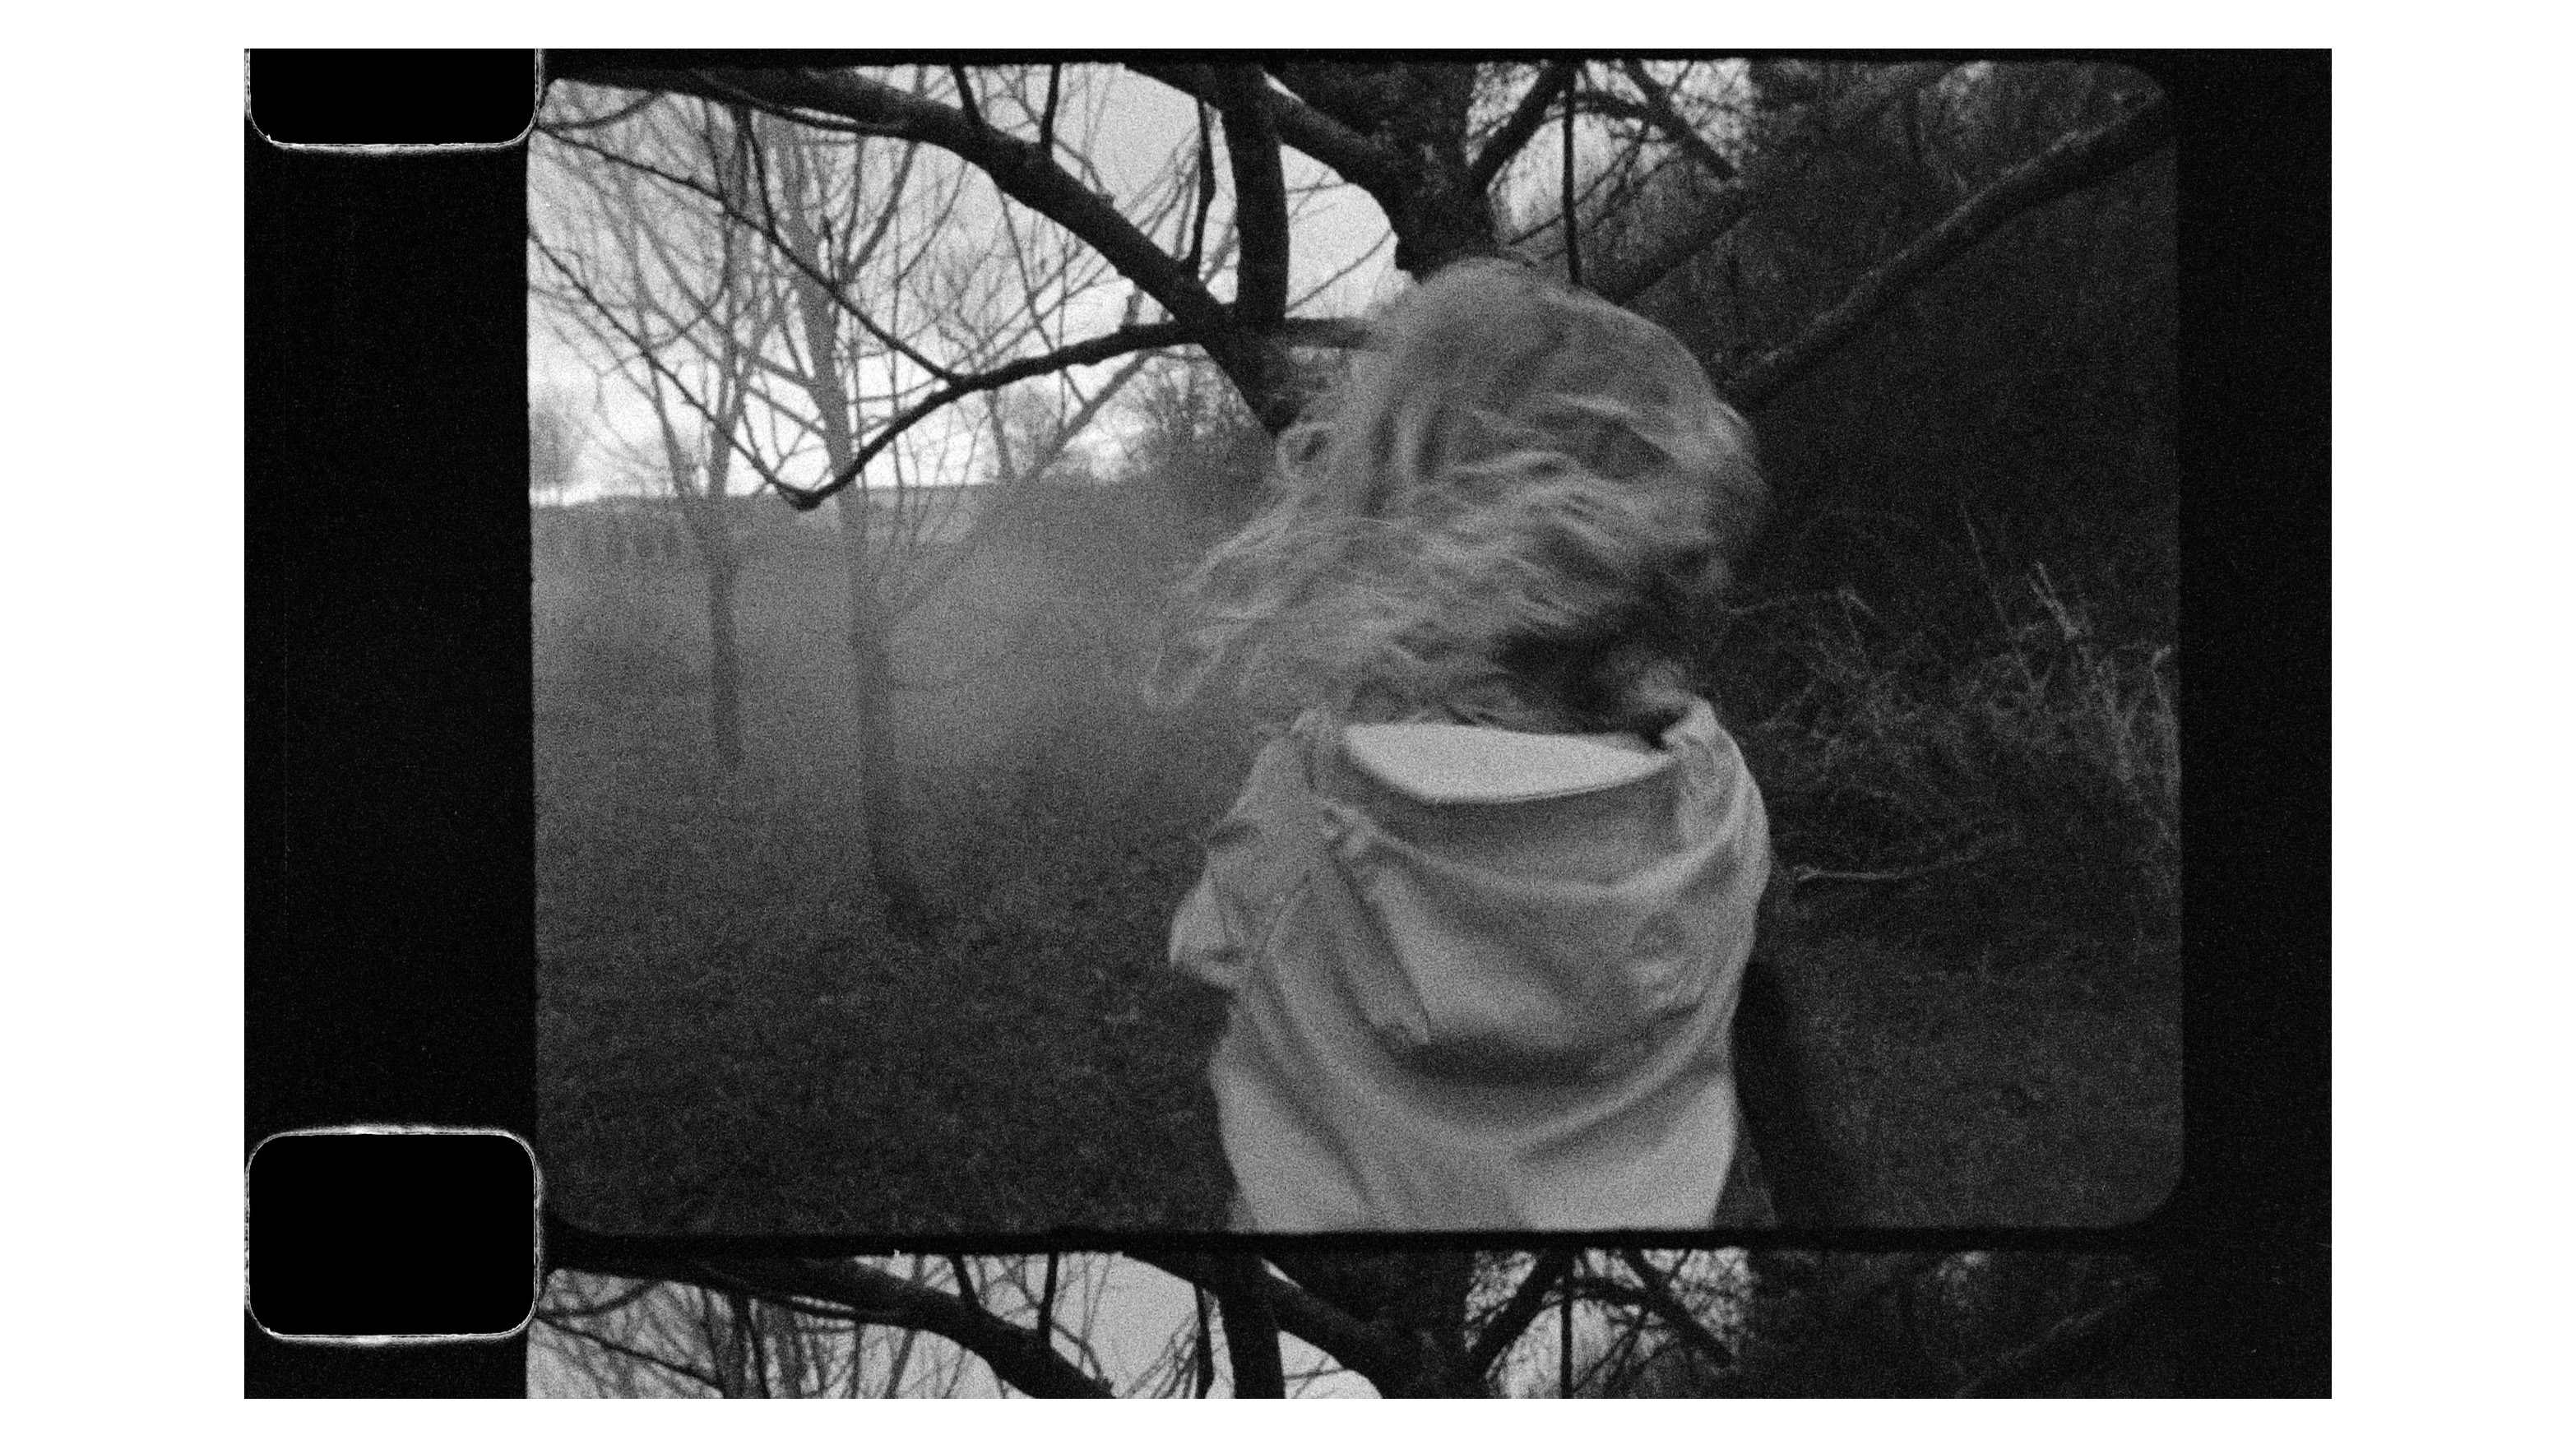 A young girl runs through a wooded area in a black-and-white photo